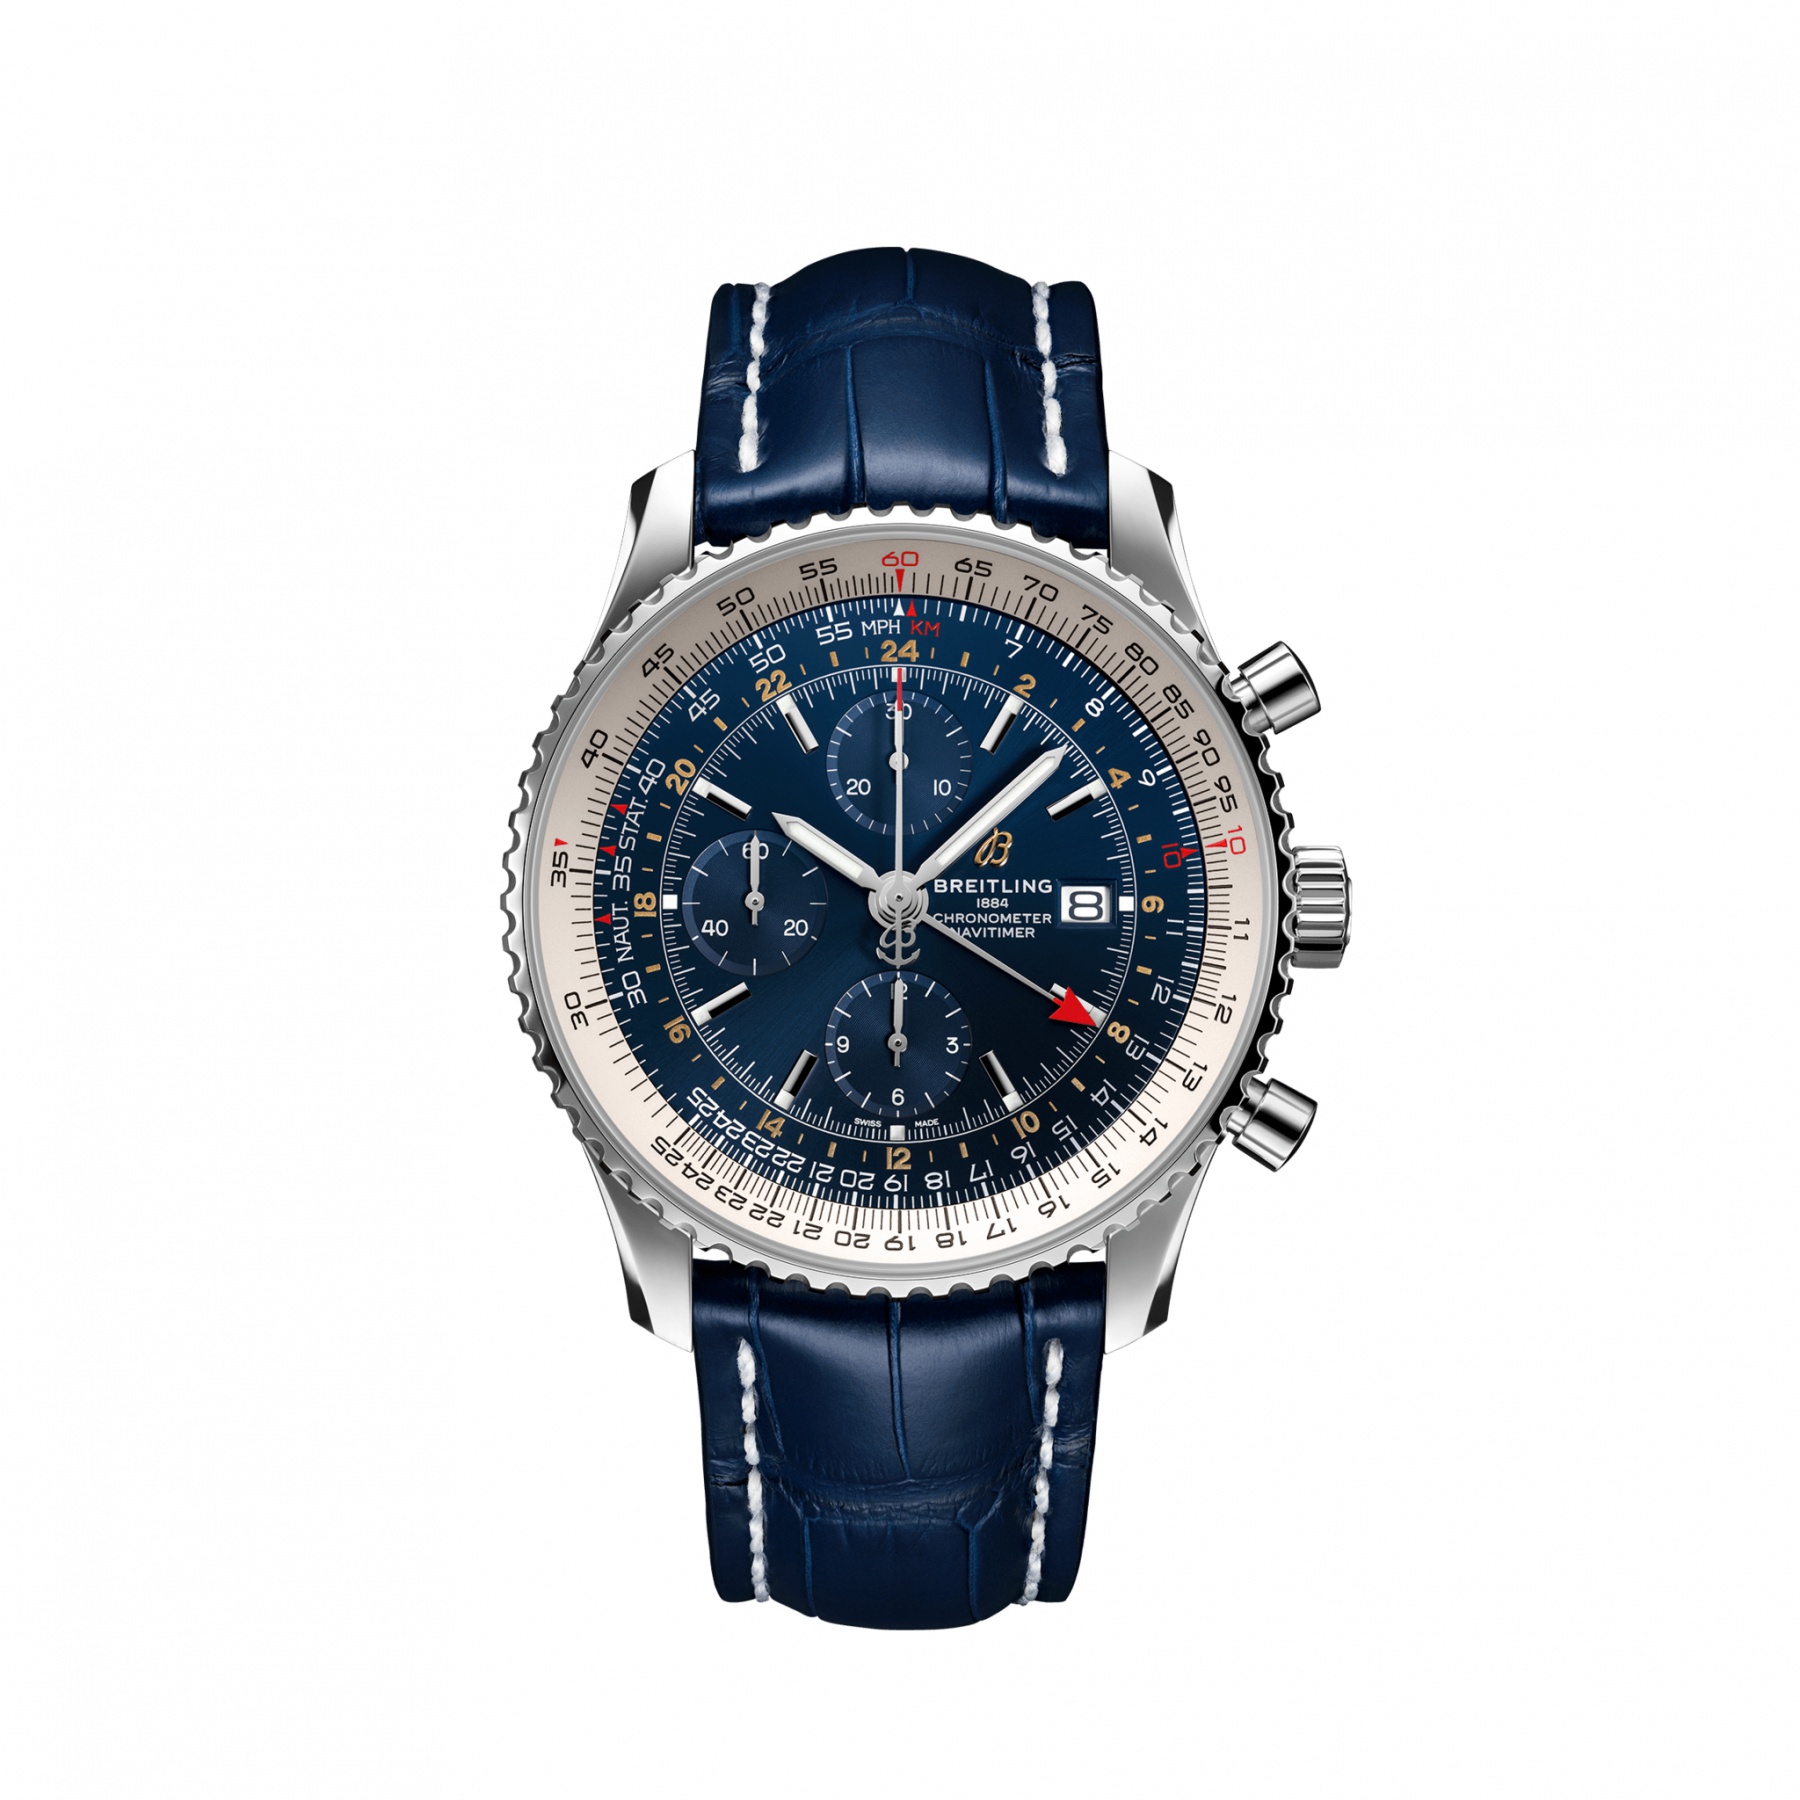 BREITLING Navitimer Chronograph GMT 46 A24322121C2P2 - Fr image pic photo